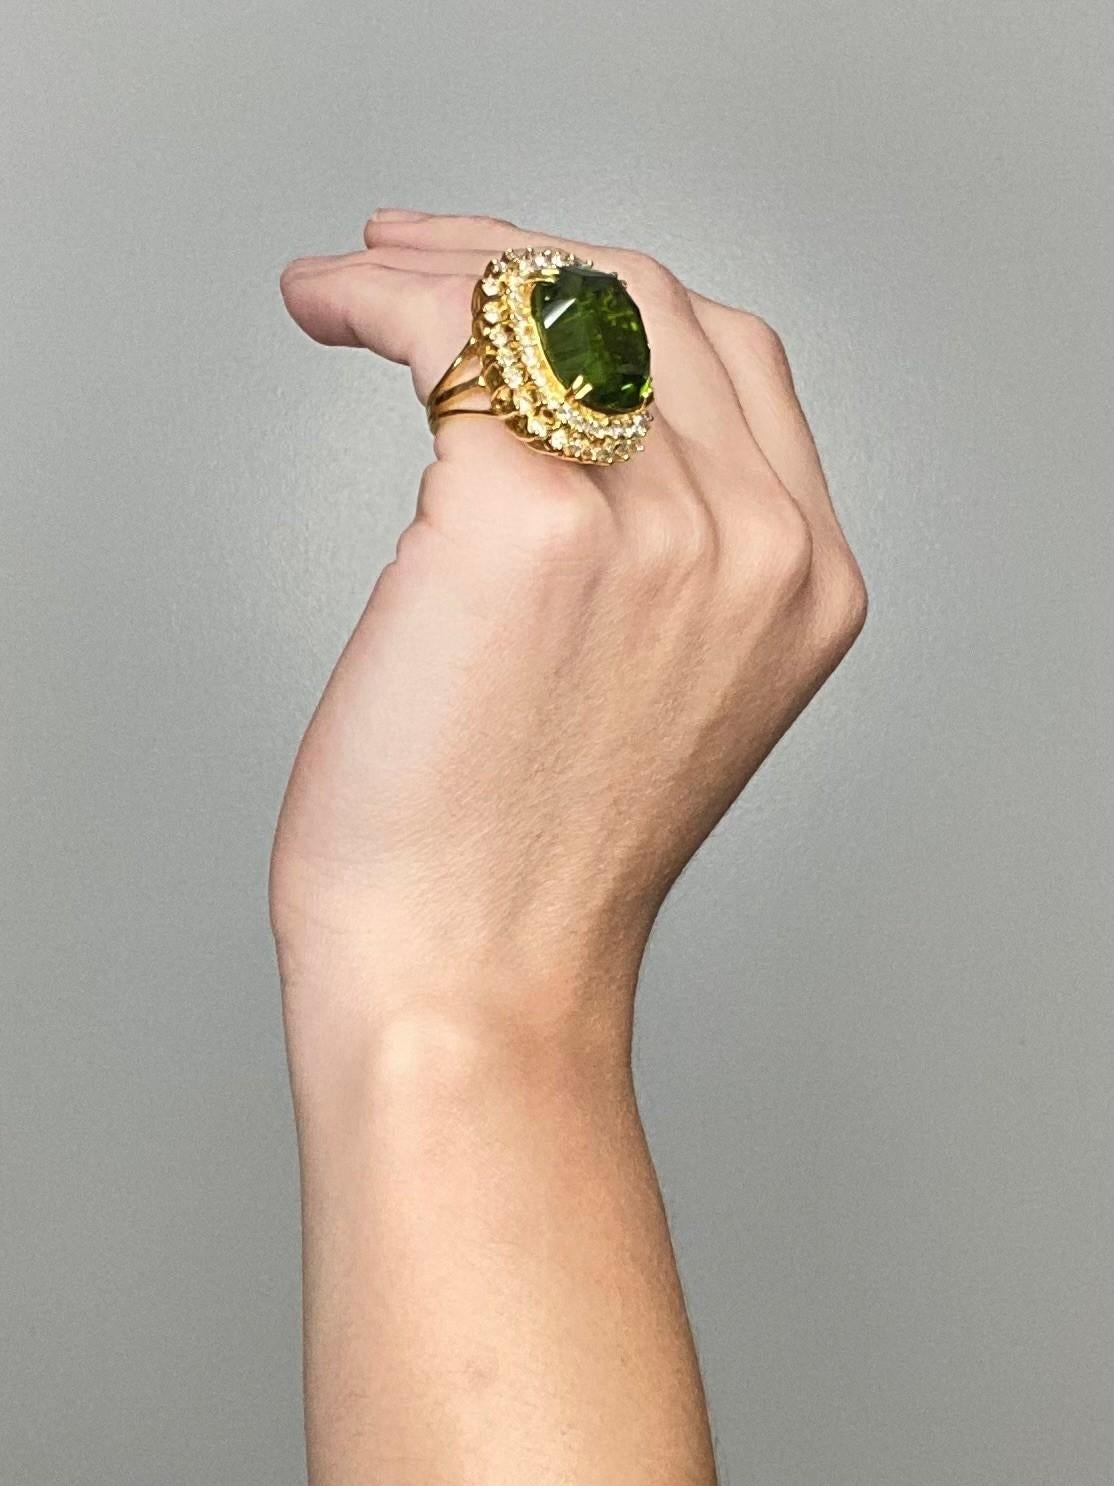 Gia Certified Massive Cocktail Ring In 18Kt With 67.79 Cts In Peridot & Diamonds For Sale 4